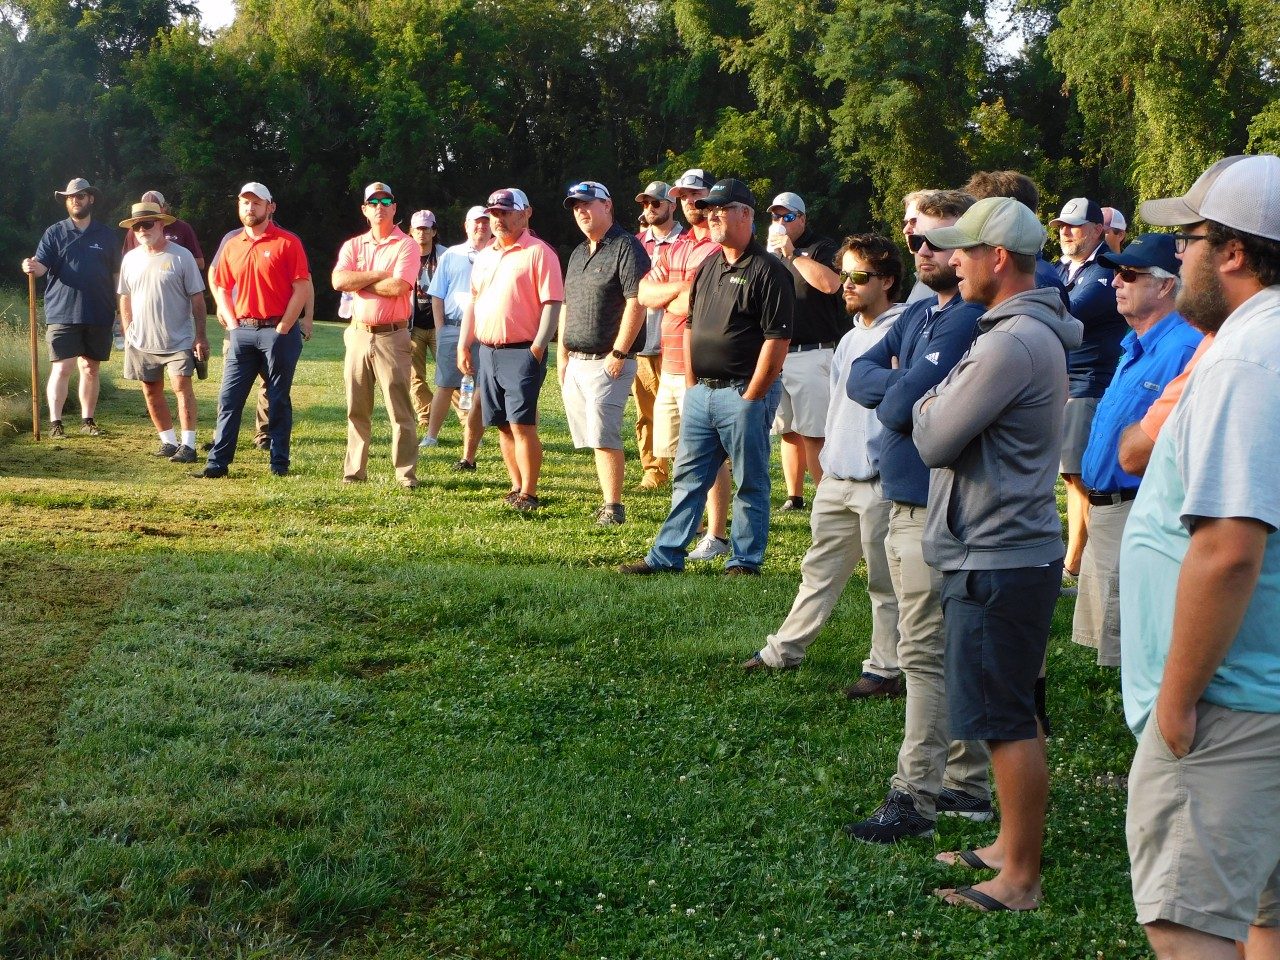 A crowd watches a presentation during the Turfgrass Research Field Day and Expo.